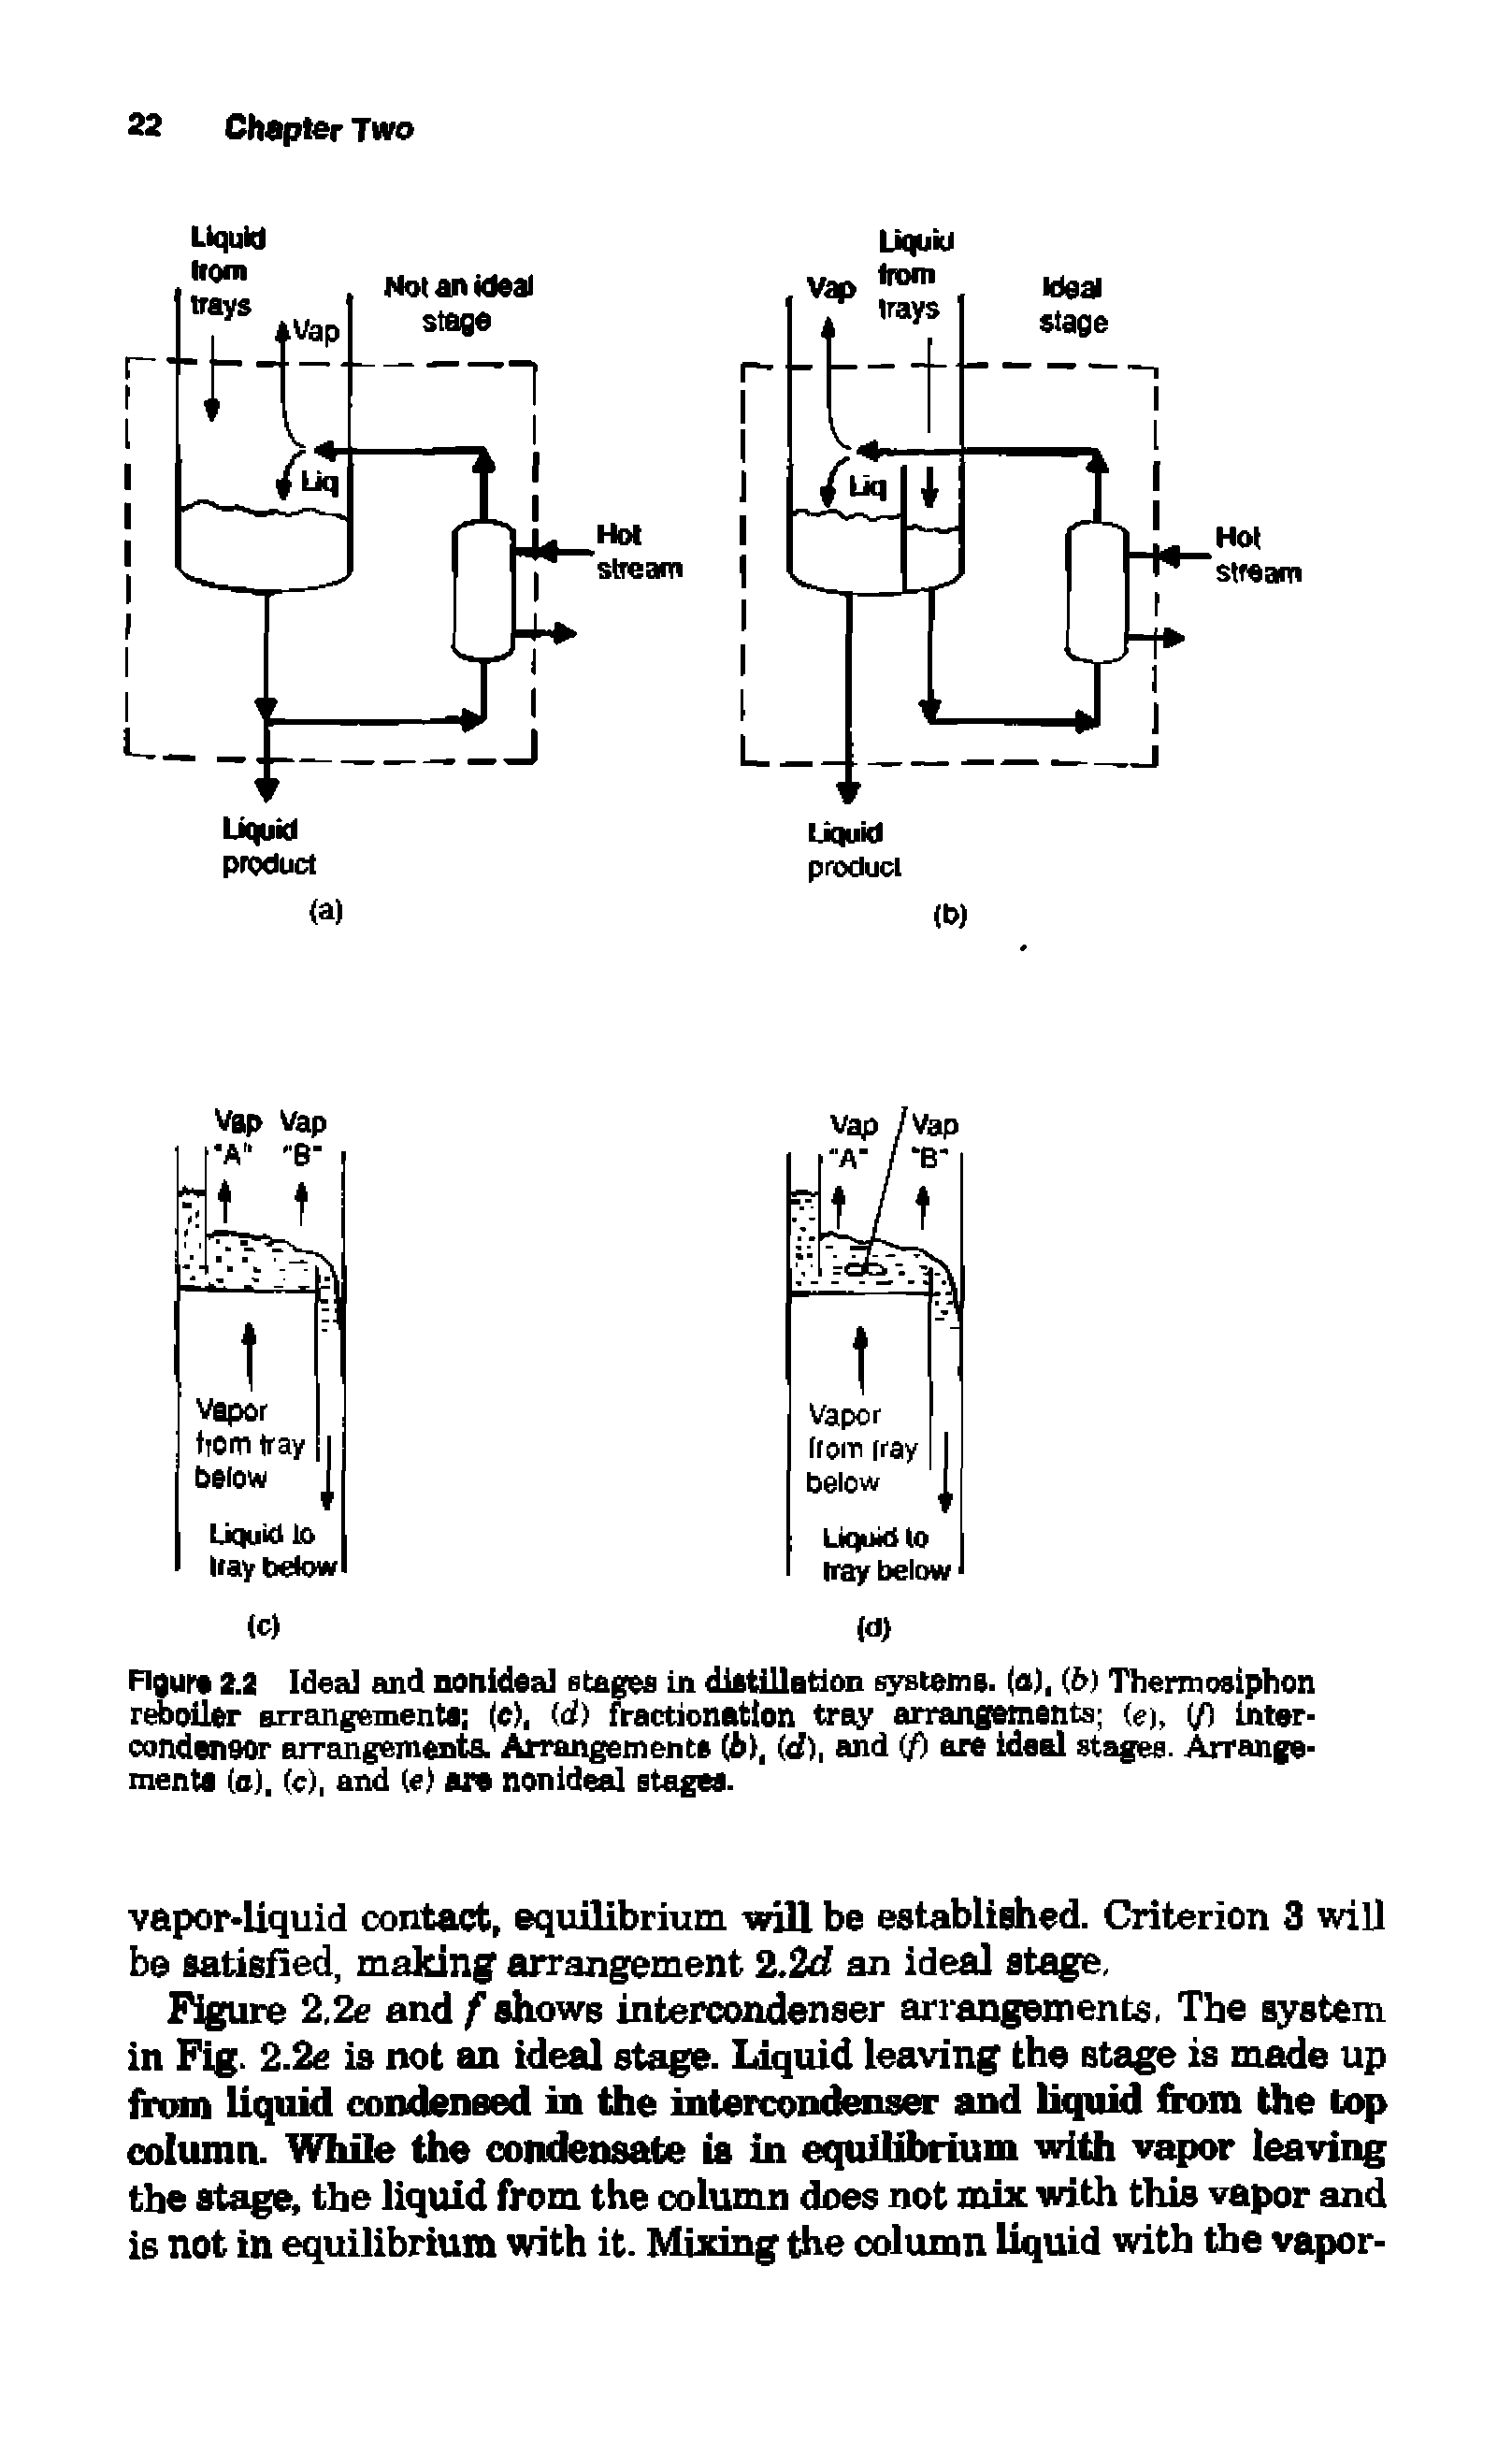 Figure 2.2 Idea] and nonideal stages in distillation systems, (a), (f>) Thermosiphon reboiler arrangements (c). id) fractionation tray arrangements (ej, (j) inter-condenaor arrangements. Arrangements (6), (d), and (/) are ideal stages. Arrangements (a), (c), and (e) an nonideal stages.